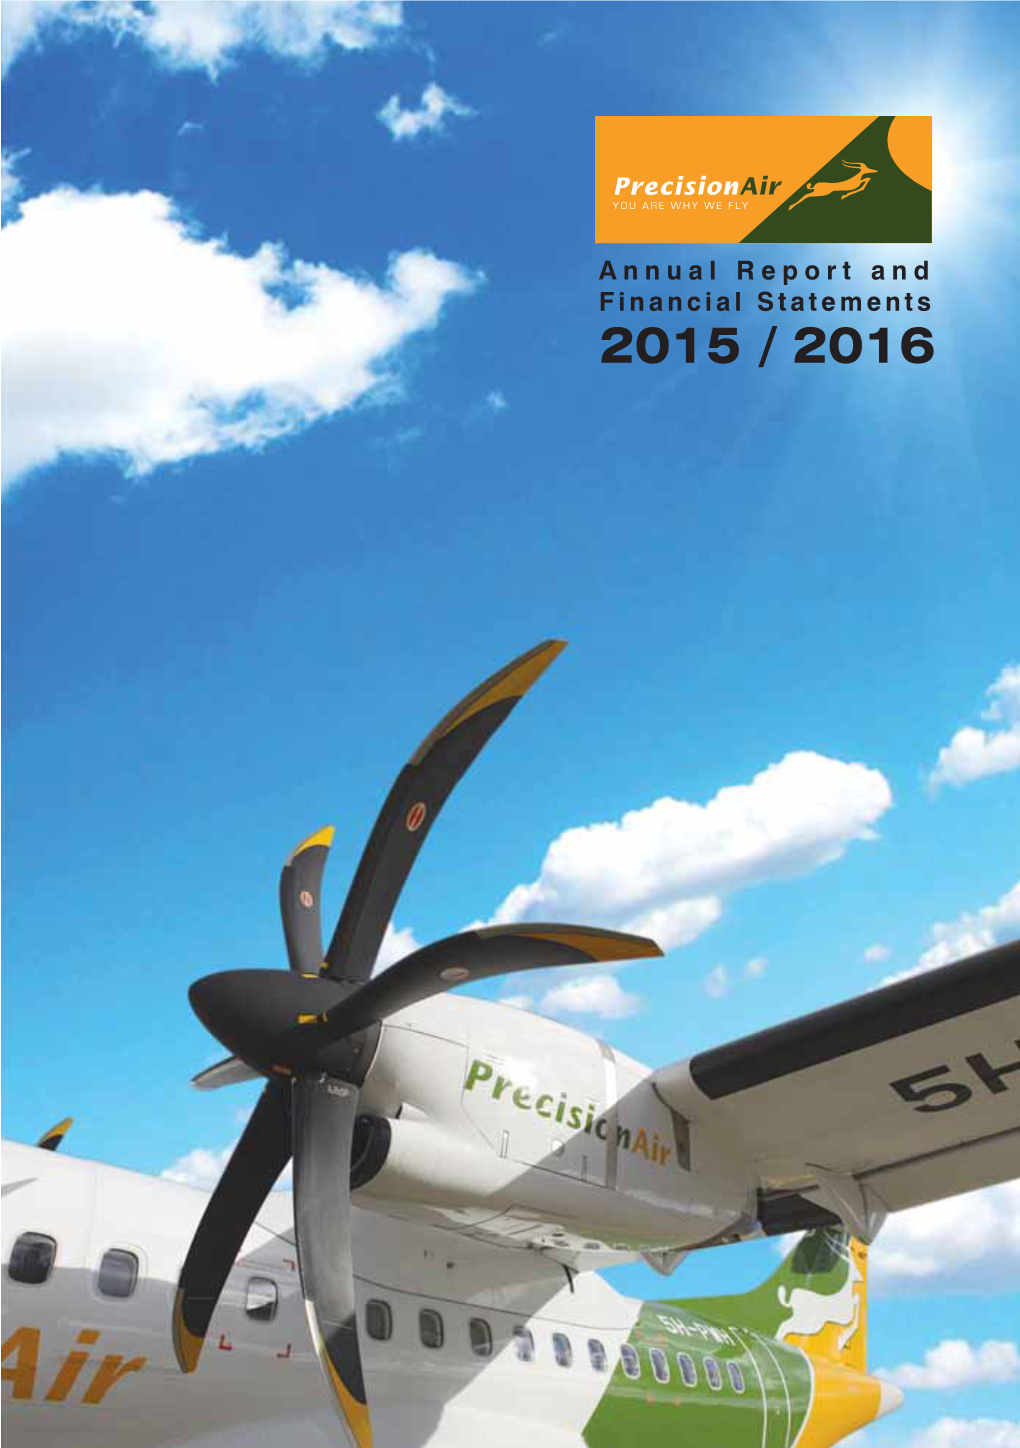 Annual Report and Financial Statements 2015 / 2016